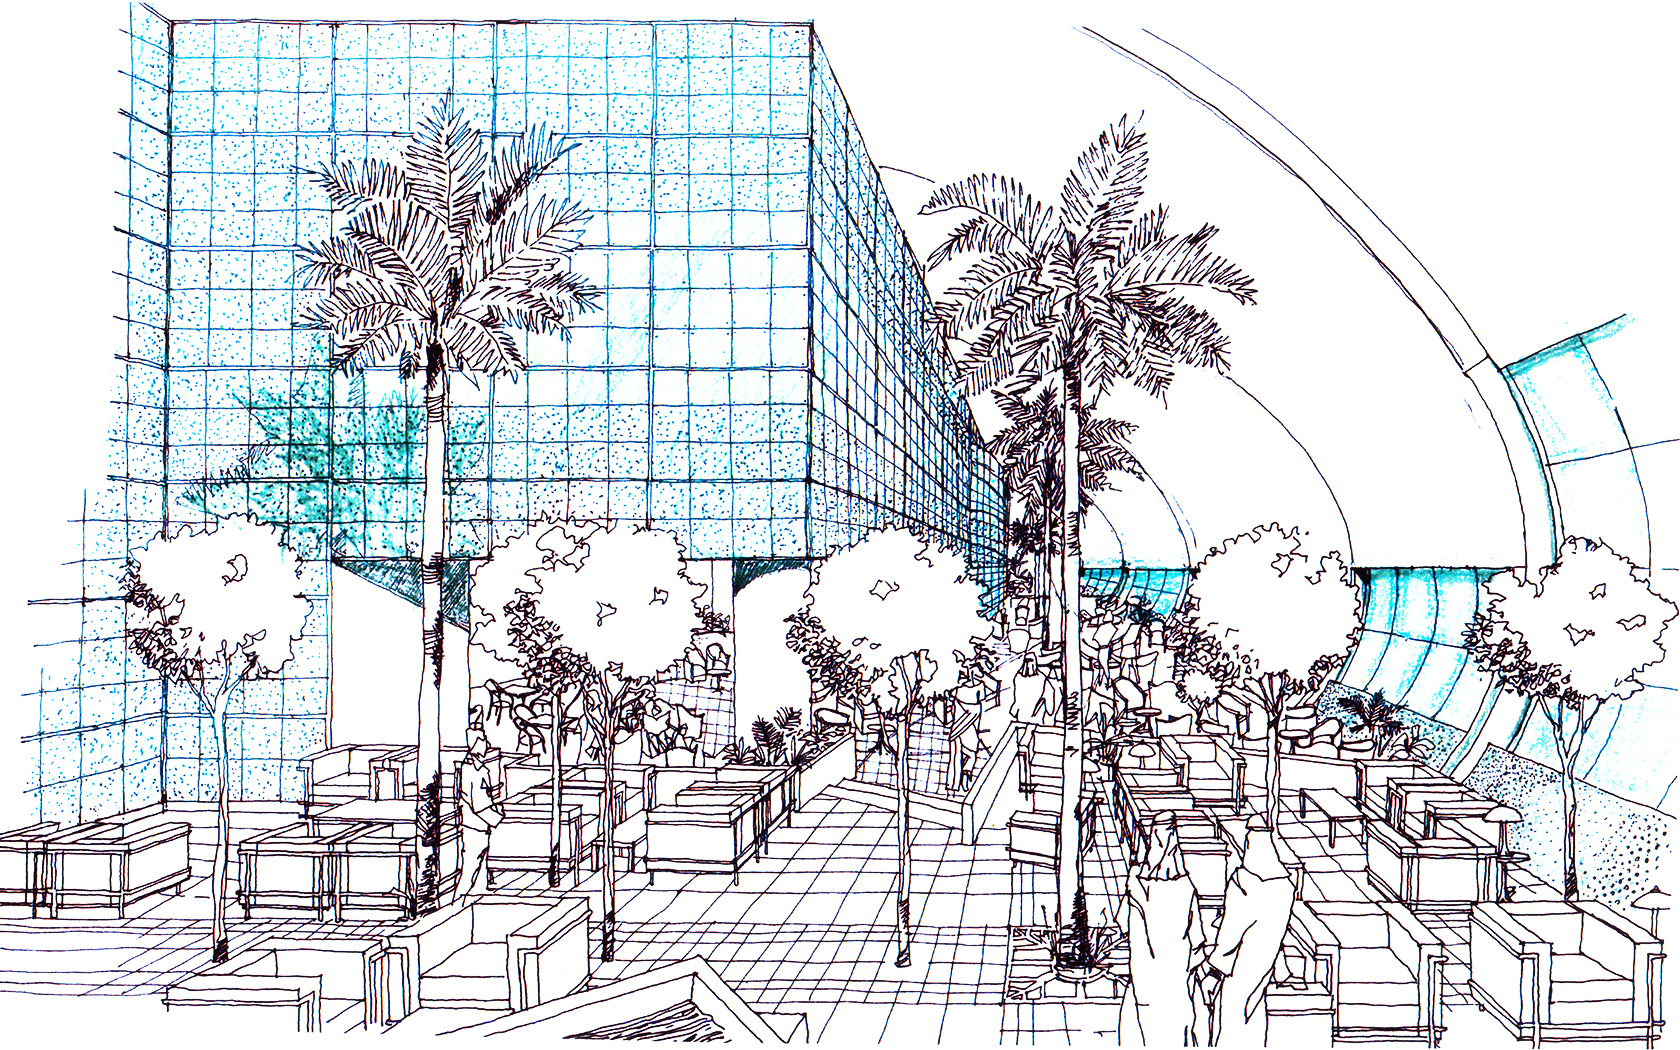 one point perspective drawings of the original Emirates First and Business Class lounges at the Dubai International Airport interior design by RTAE, Dubai